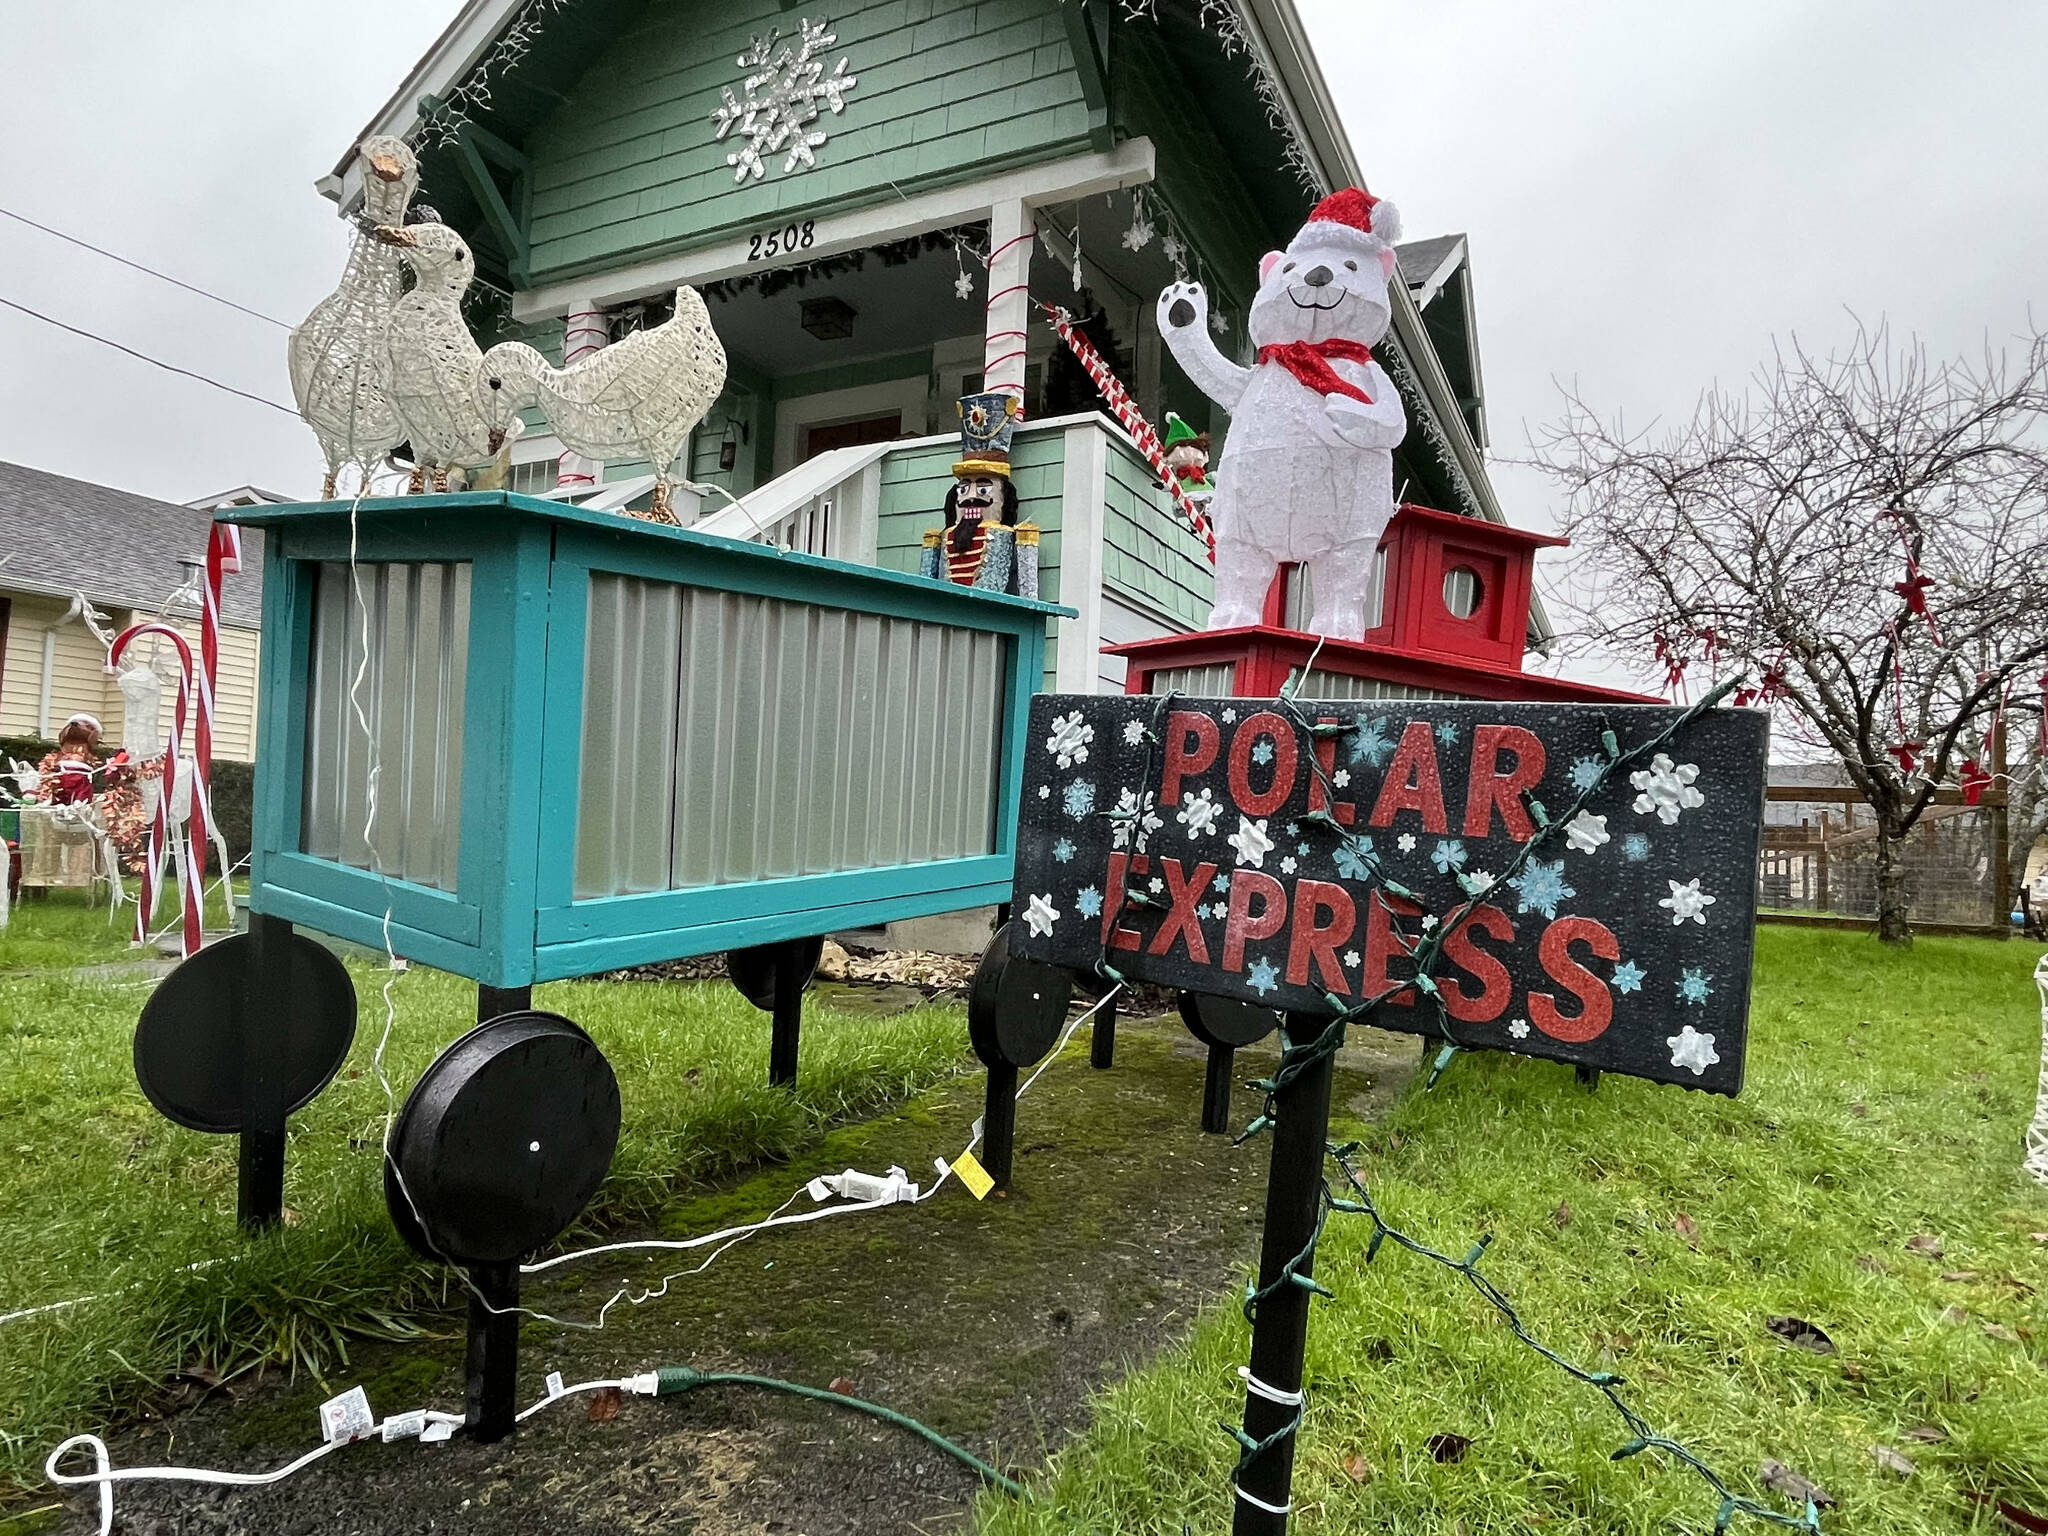 Michele Crane's "Christmas Wonderland" in the 2500 block of Queets Avenue, in Hoquiam, features a variety of Christmas classics, such as the "Polar Express." The friendly polar bear and geese atop the hand-built train cars greet passersby.